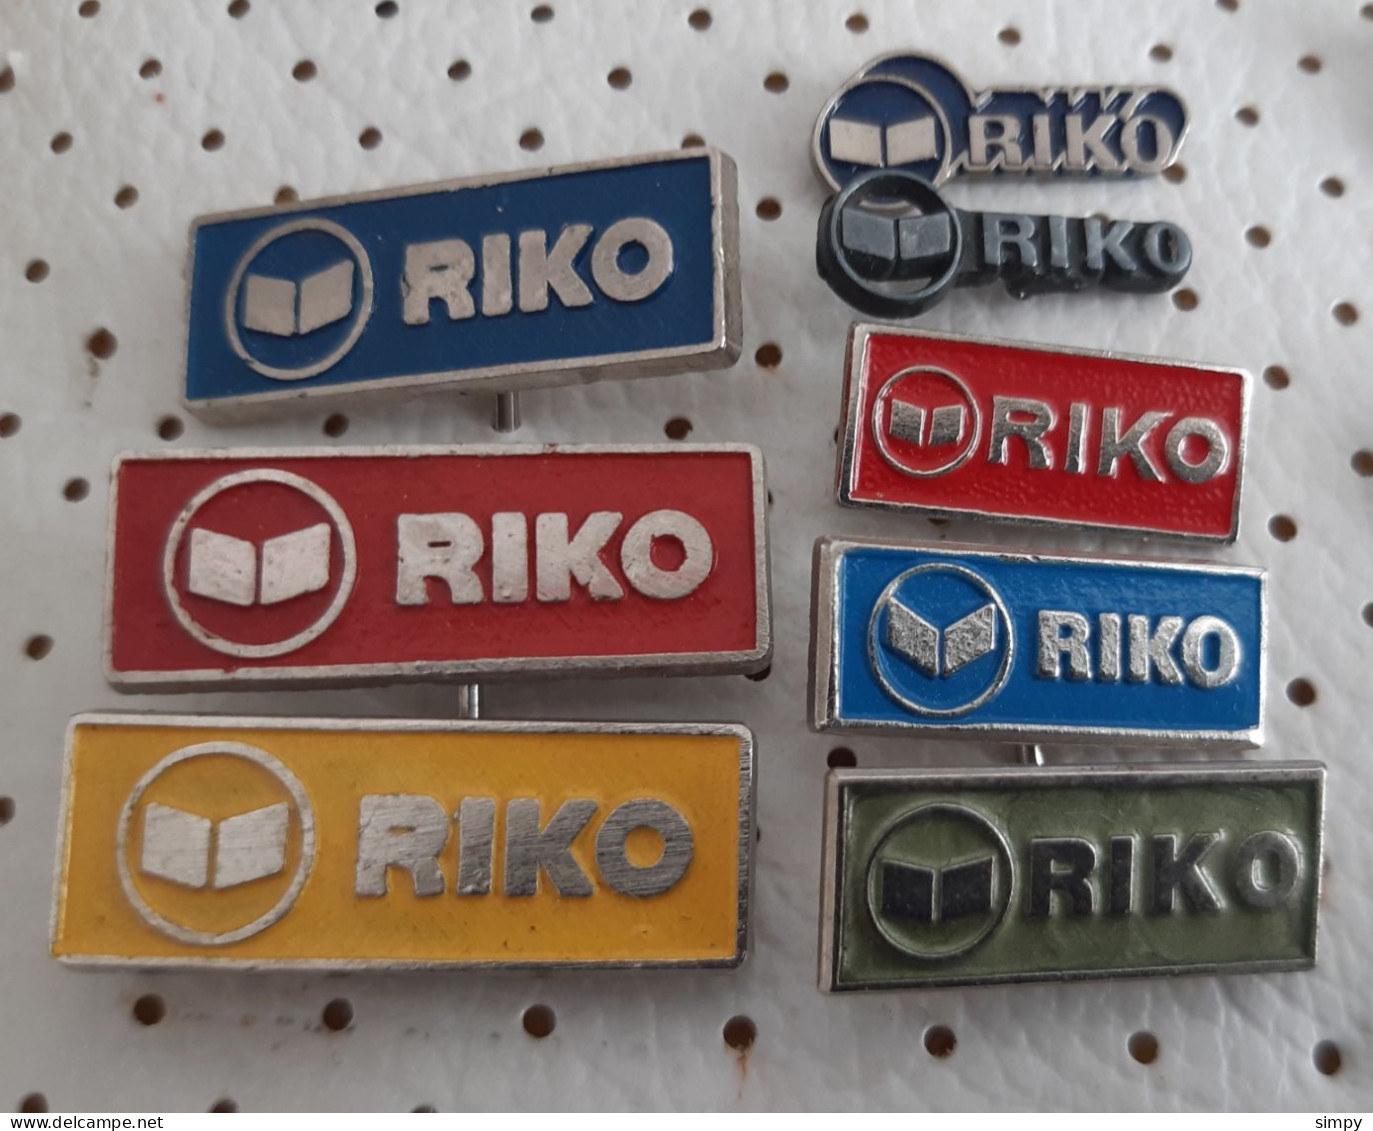 RIKO Ribnica Plowing Factory Snow Blowers Spreaders Charrue Pflug Plows Tondeuse Slovenia 8 Different Pins - Marques